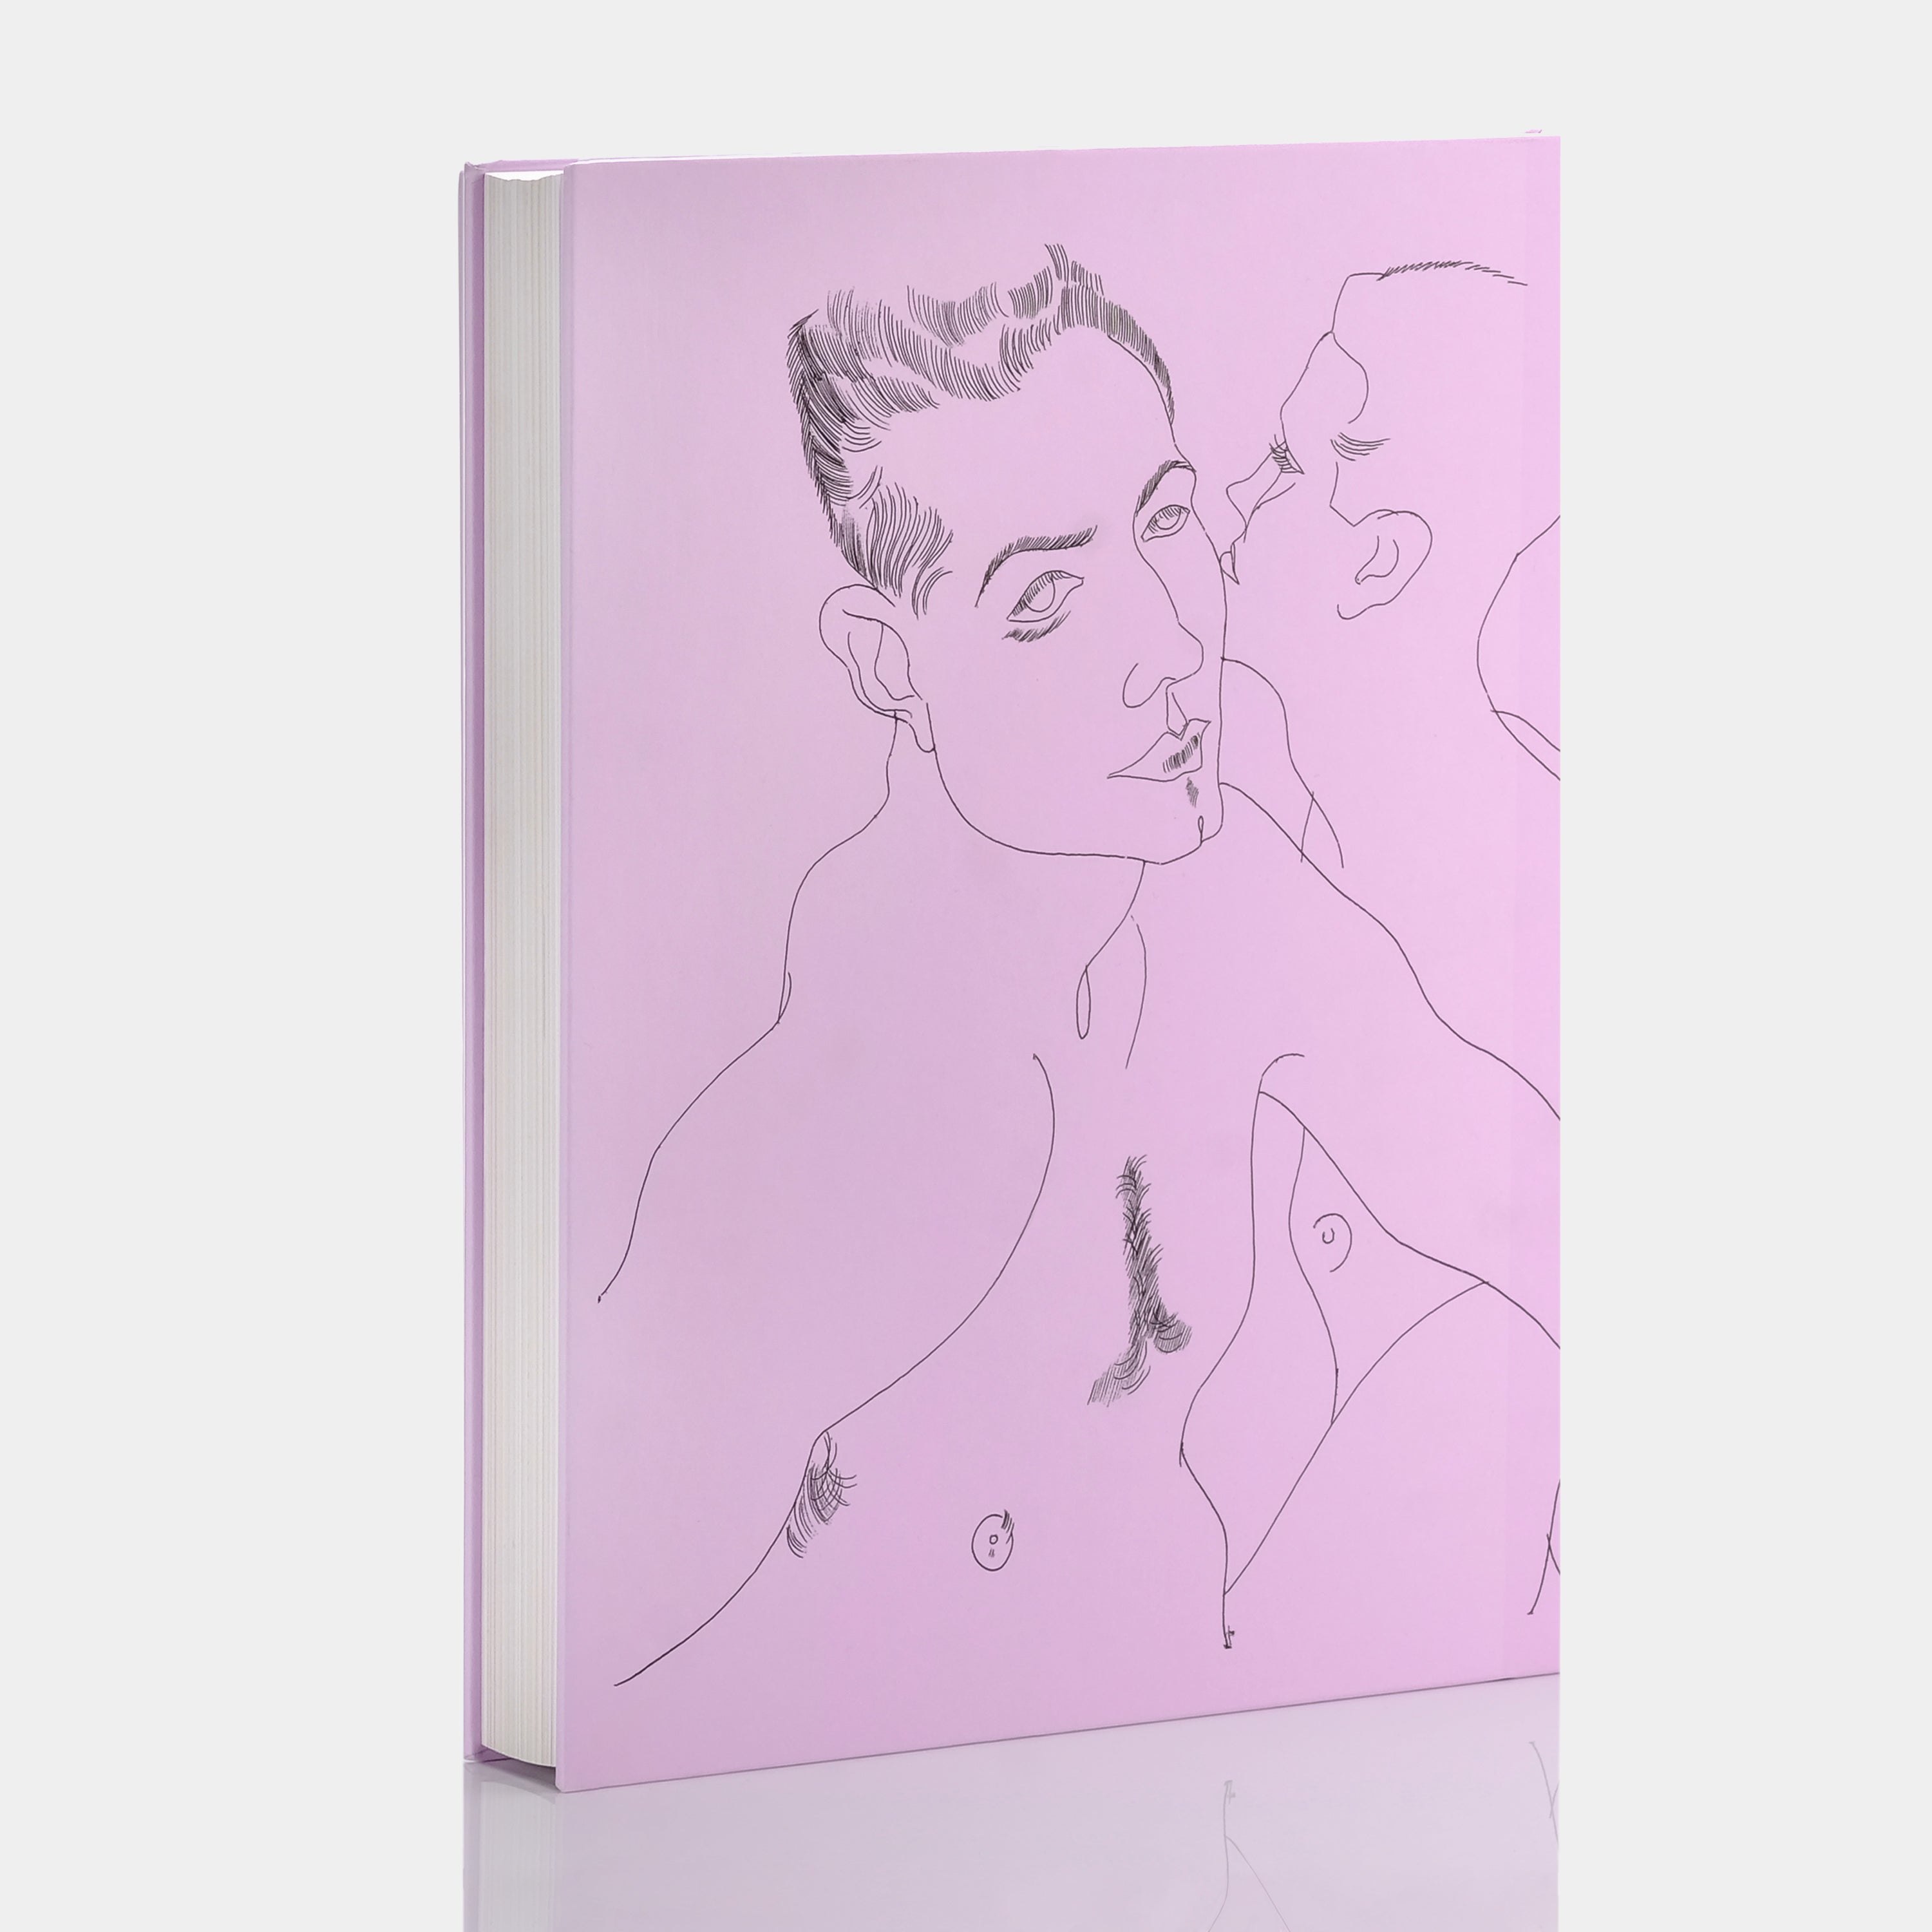 Andy Warhol: Love, Sex, and Desire (Drawings 1950–1962) Taschen Book